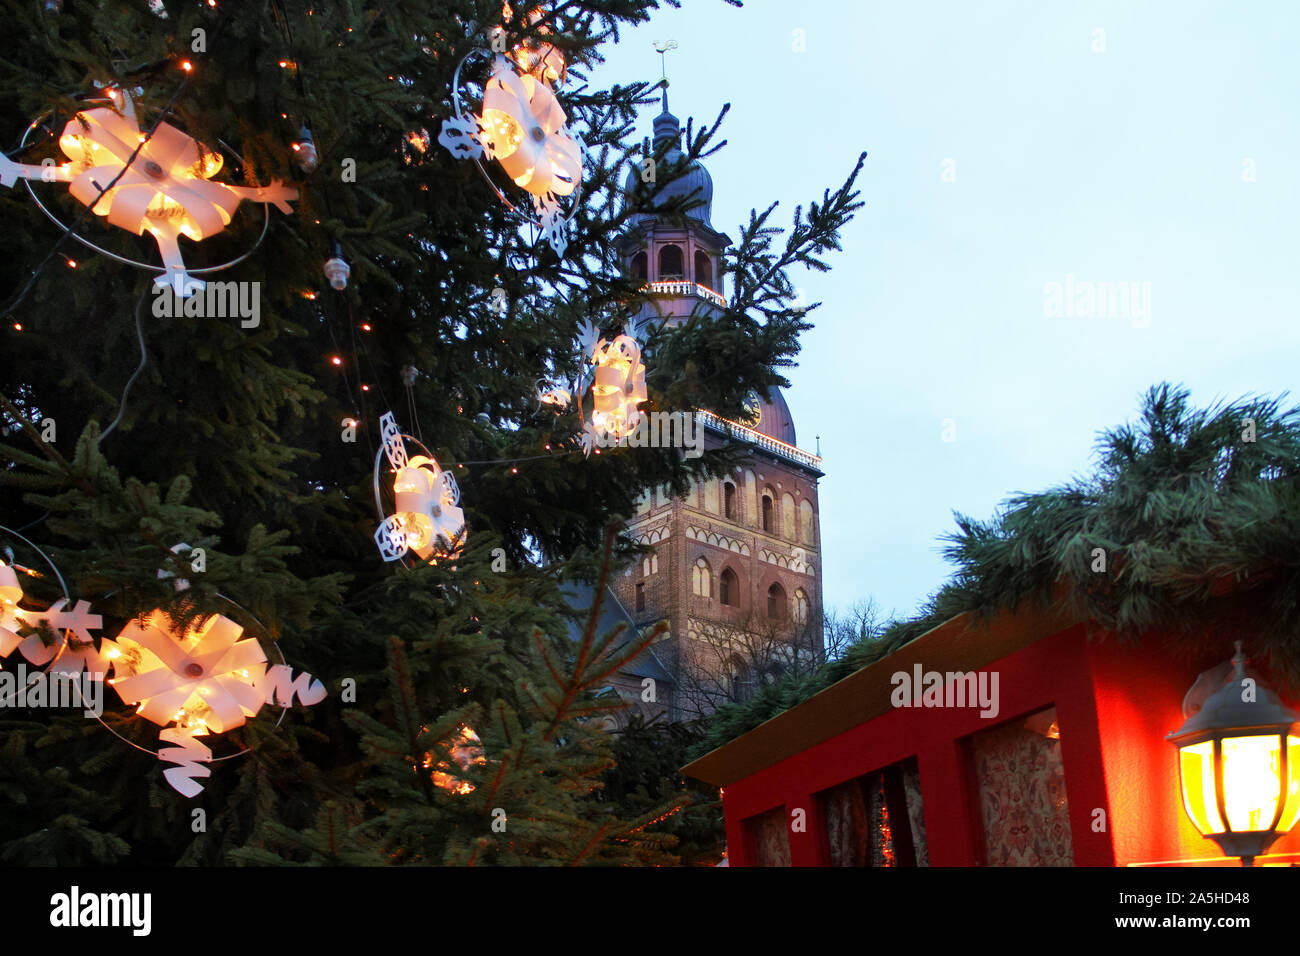 Christmas background with tree, festive warm yellow lights, lantern and church tower of Riga Dome Cathedral in Old Town, Latvia, New Year's Eve Stock Photo